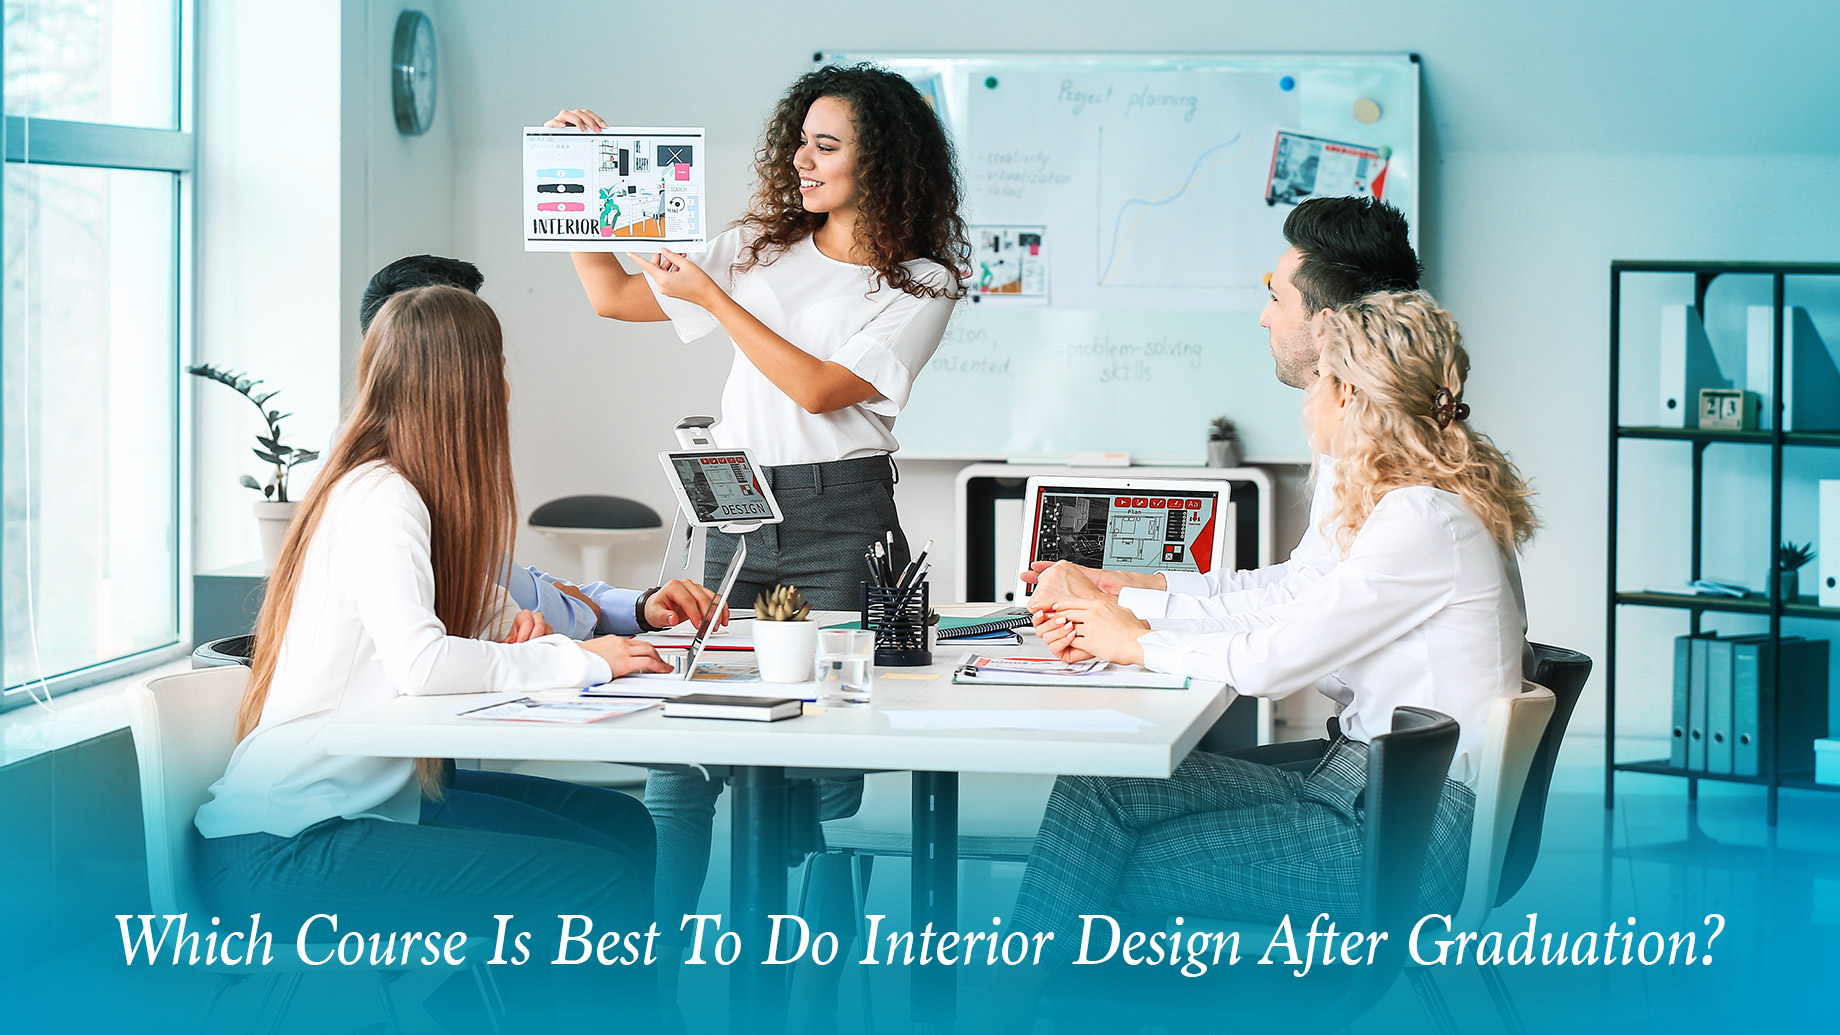 Which Course Is Best To Do Interior Design After Graduation?